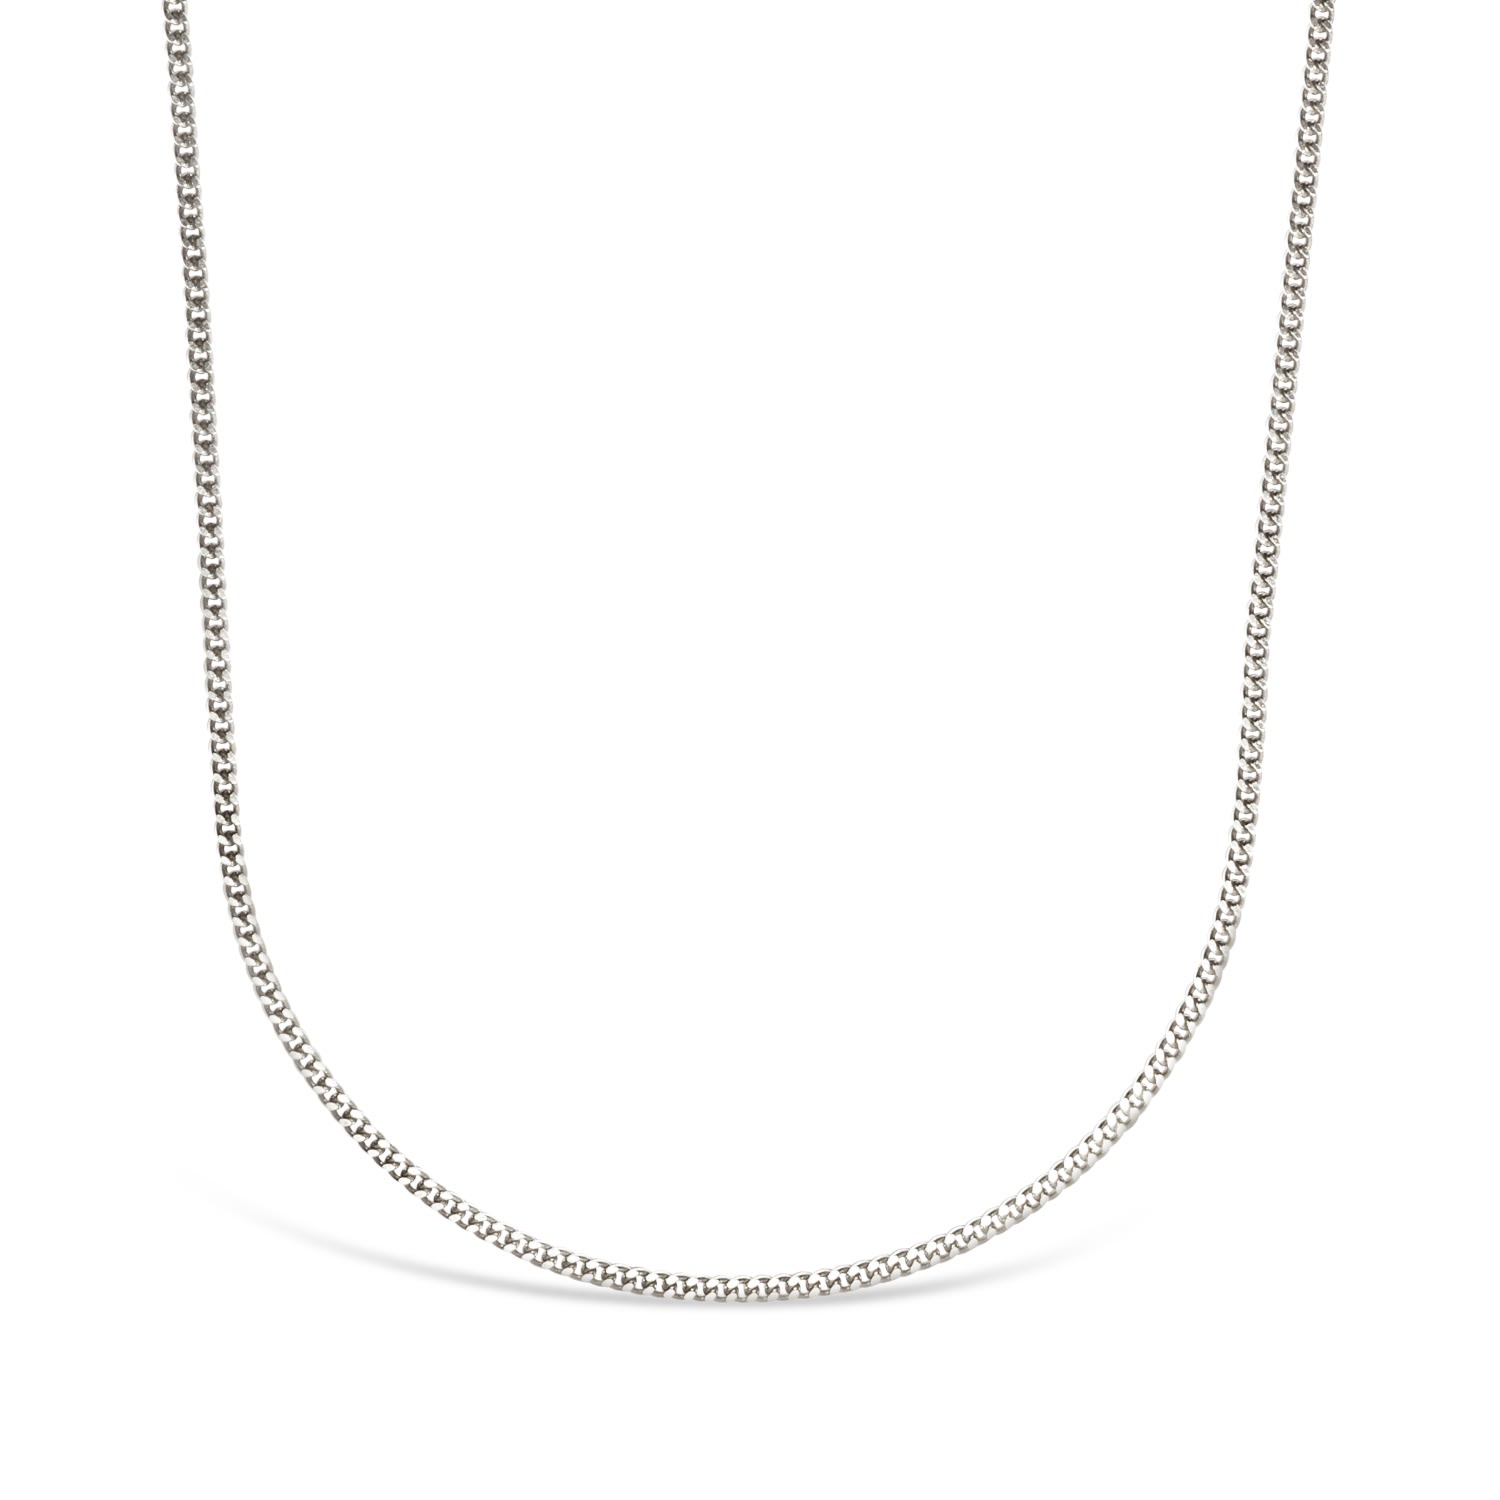 Men's Thin Cuban Chain Necklace - Sterling Silver 3.5 Mm - Silver LOUPN